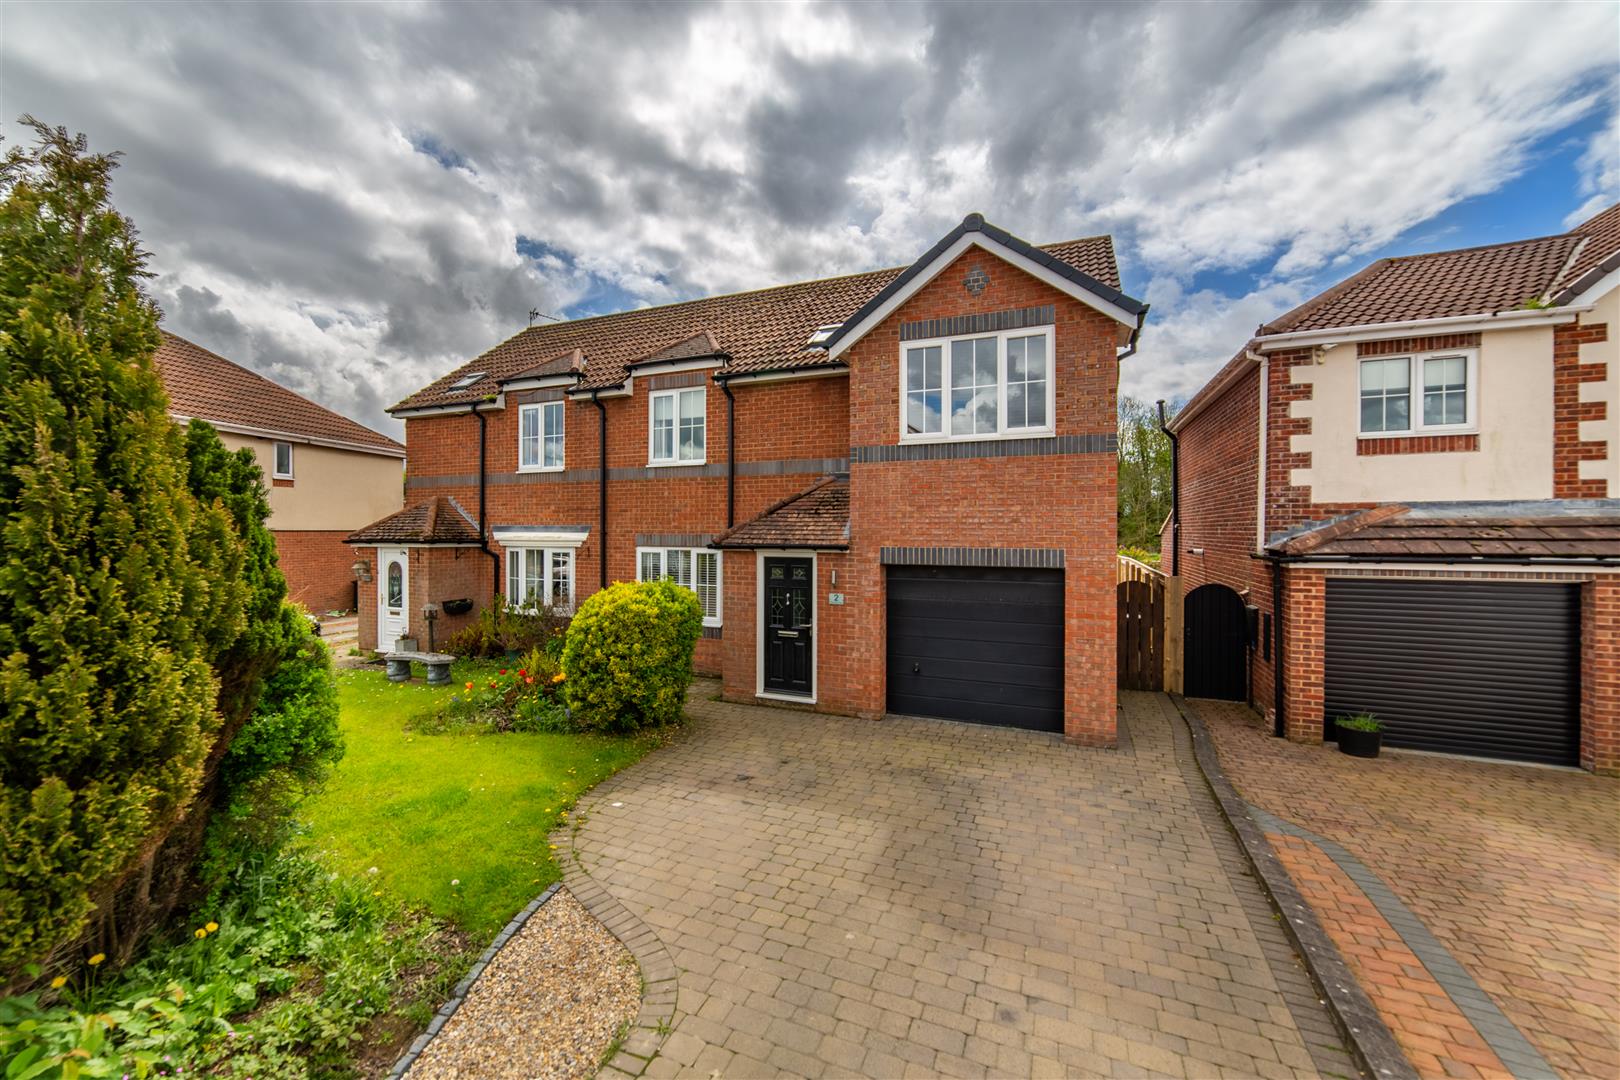 4 bed semi-detached house for sale in Thirlmere Close, Killingworth - Property Image 1